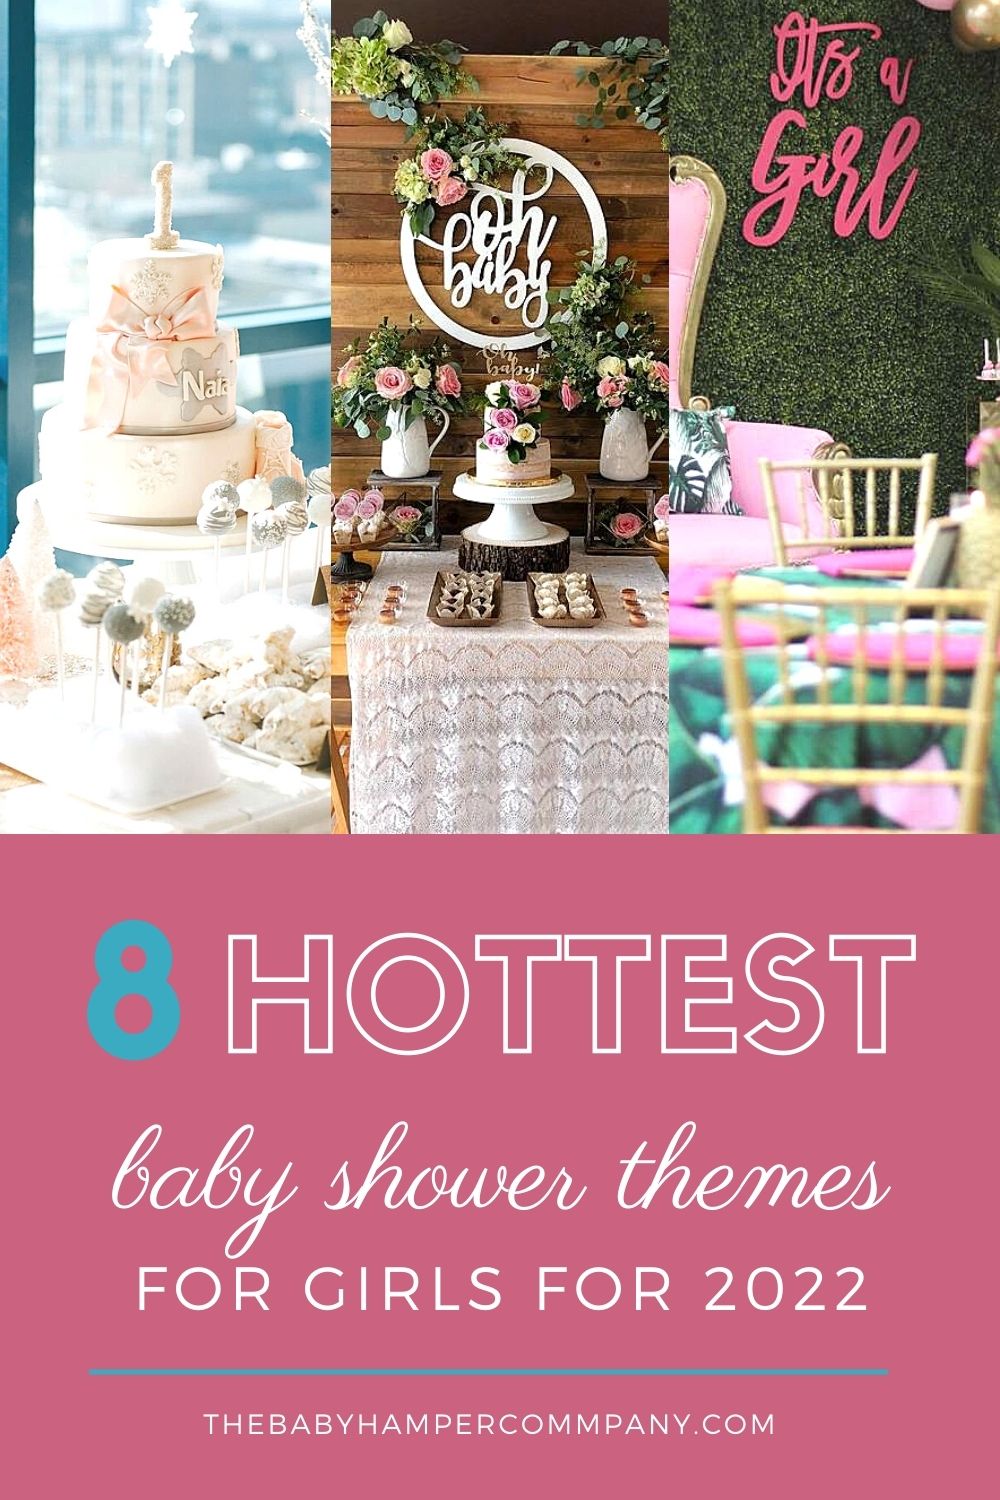 Hottest Baby Shower Themes For Girls For 2022